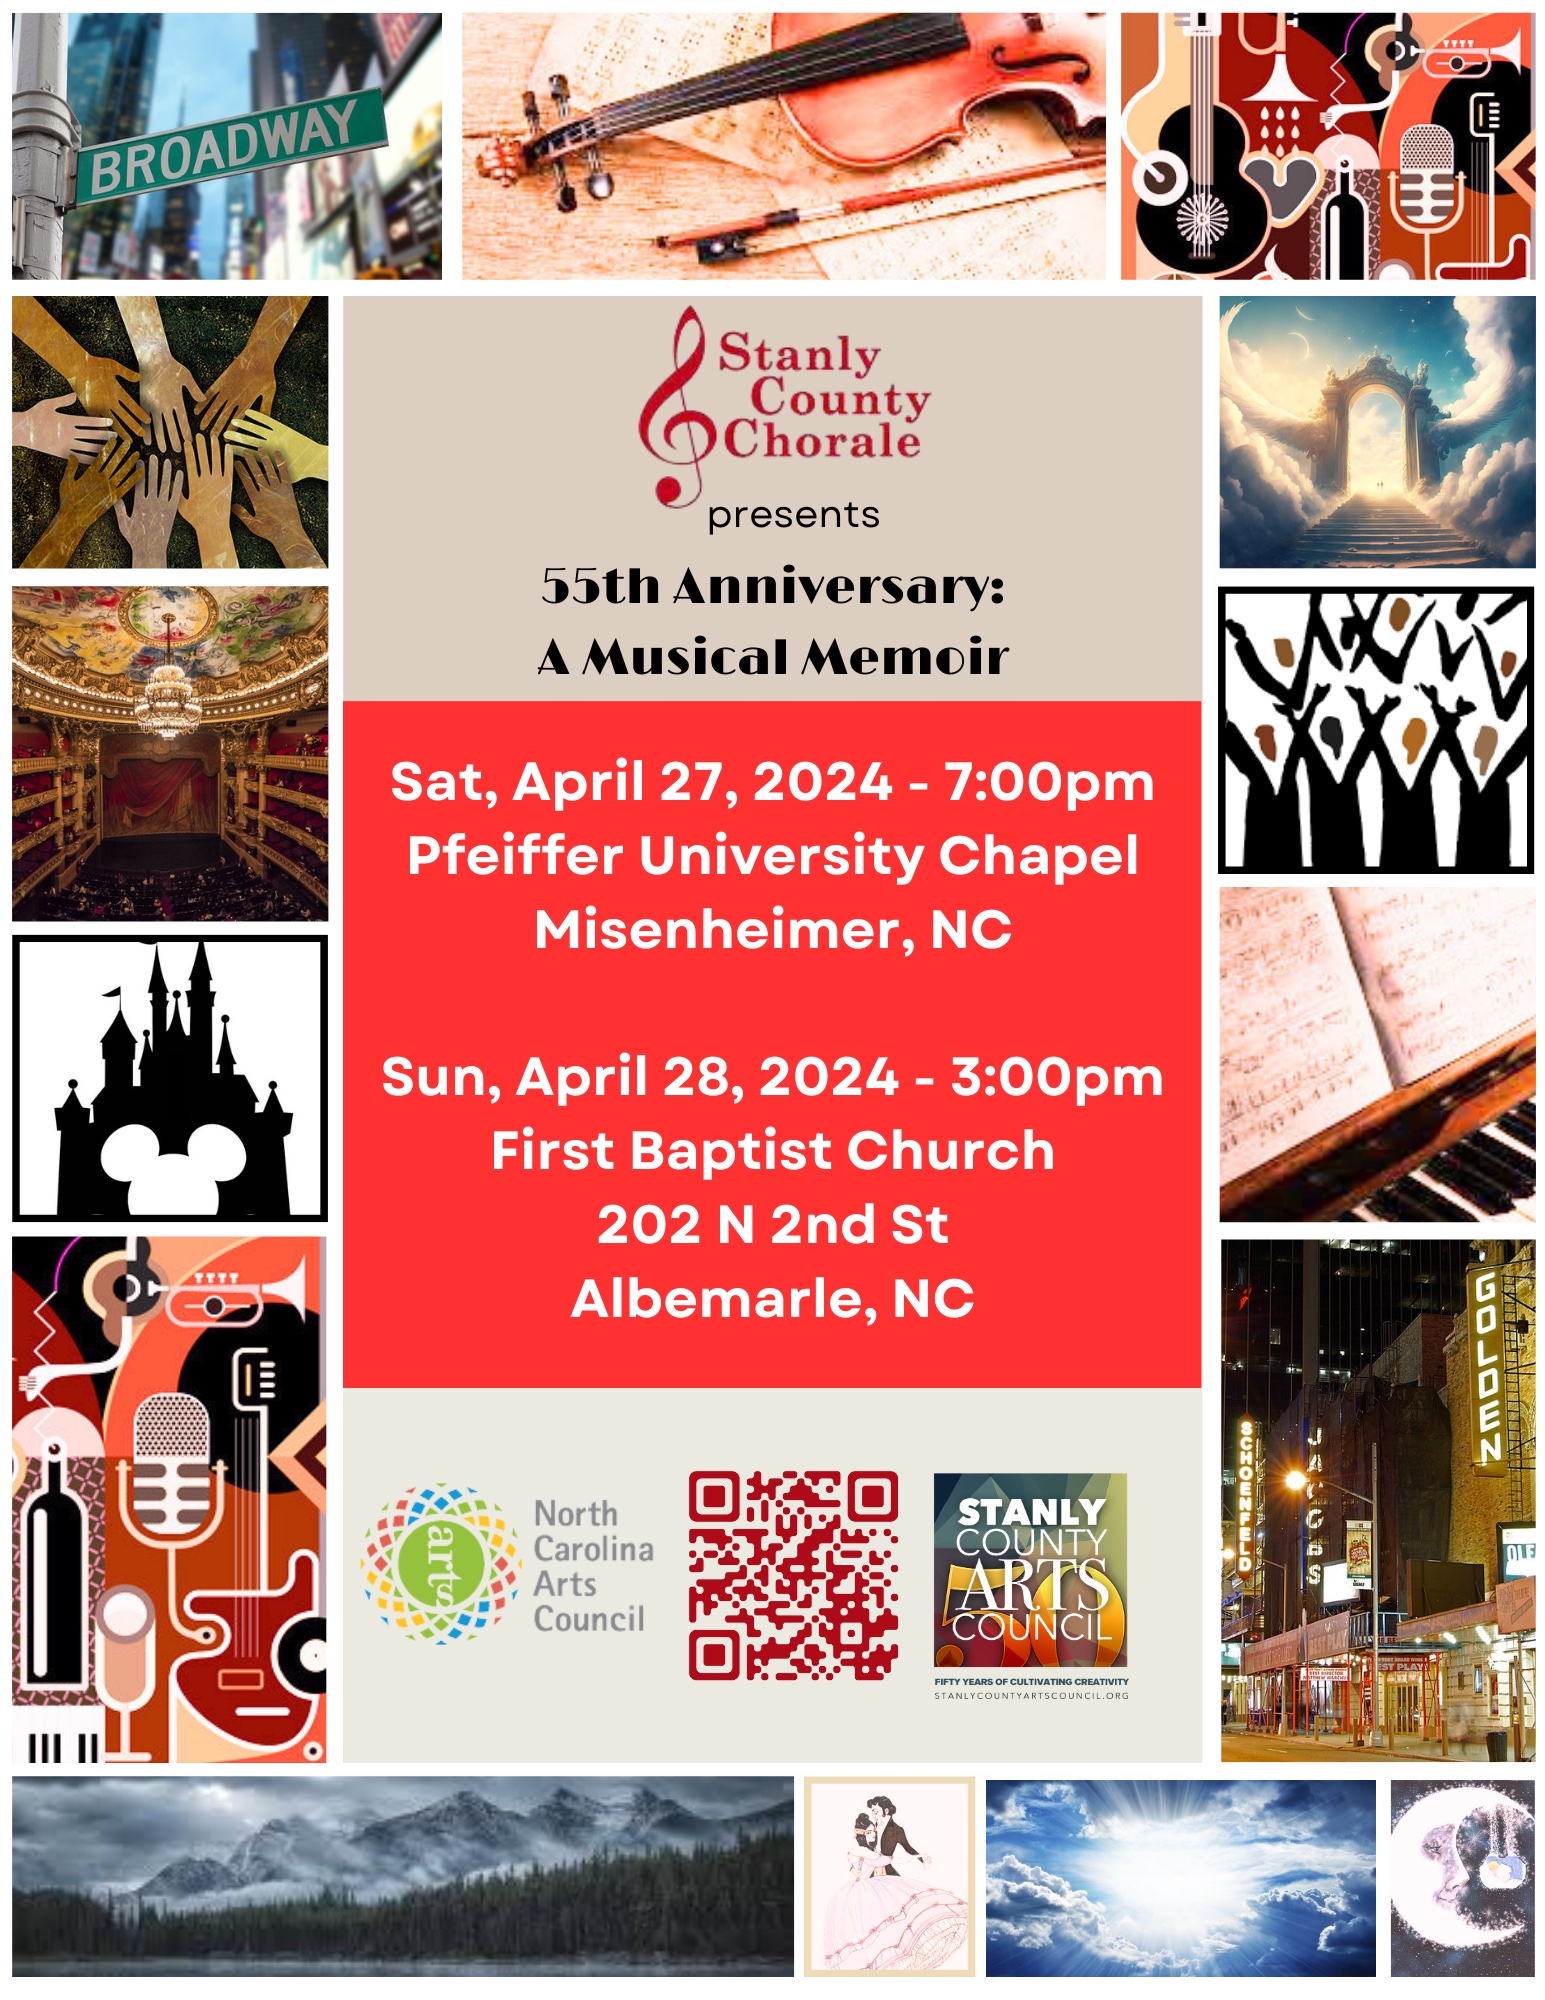 Stanly County Chorale presents 55th Anniversary: A Musical Memoir